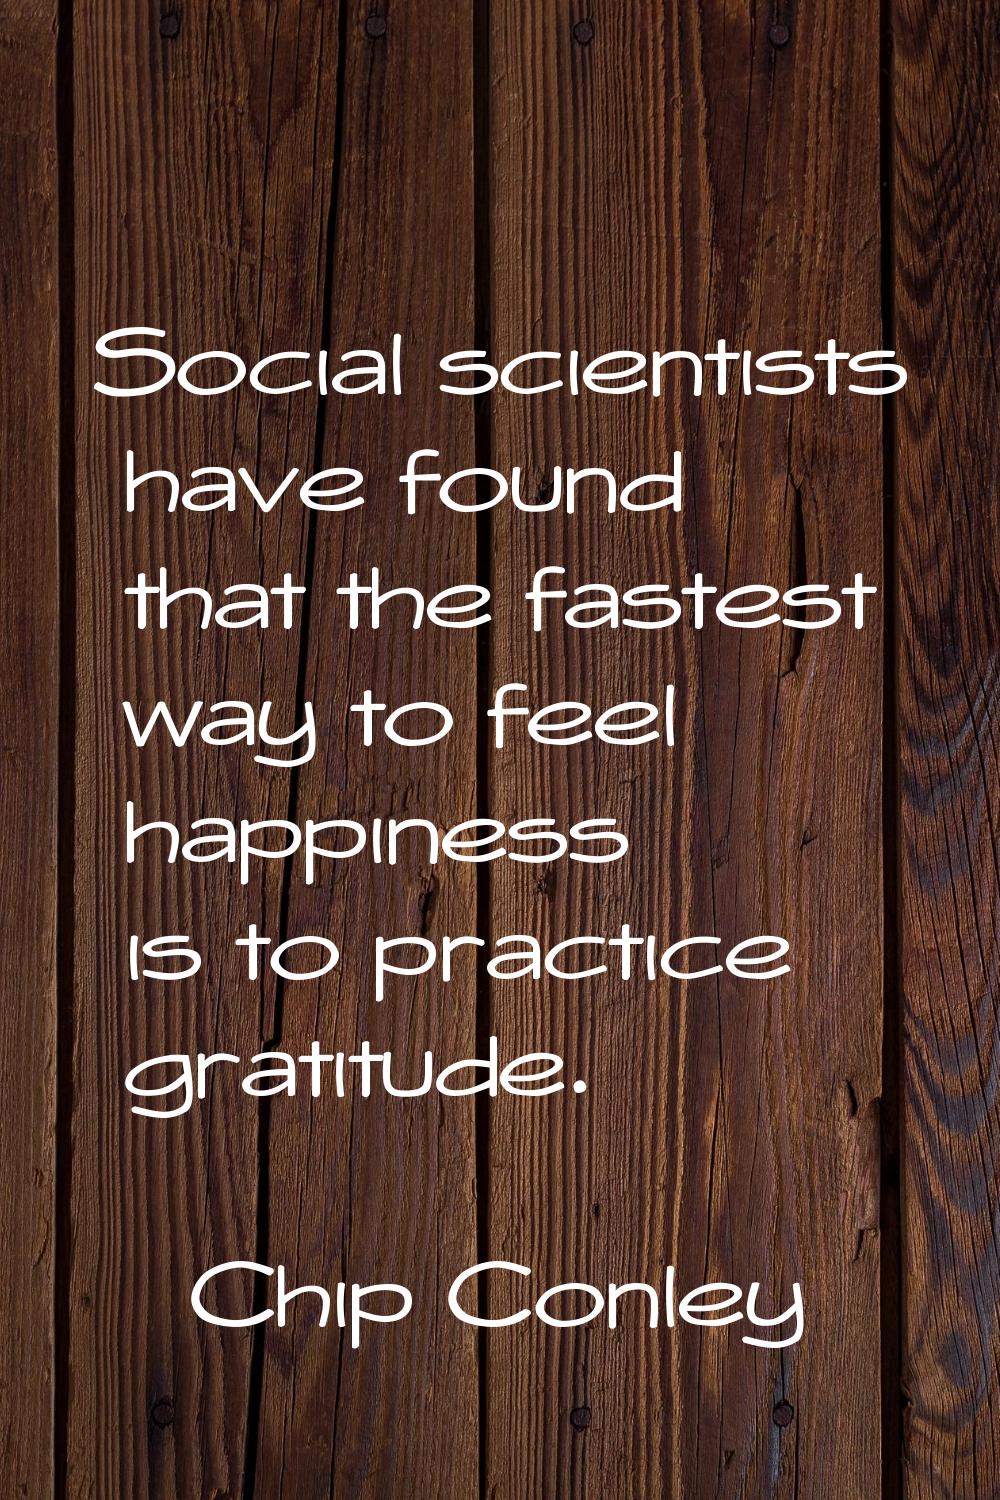 Social scientists have found that the fastest way to feel happiness is to practice gratitude.